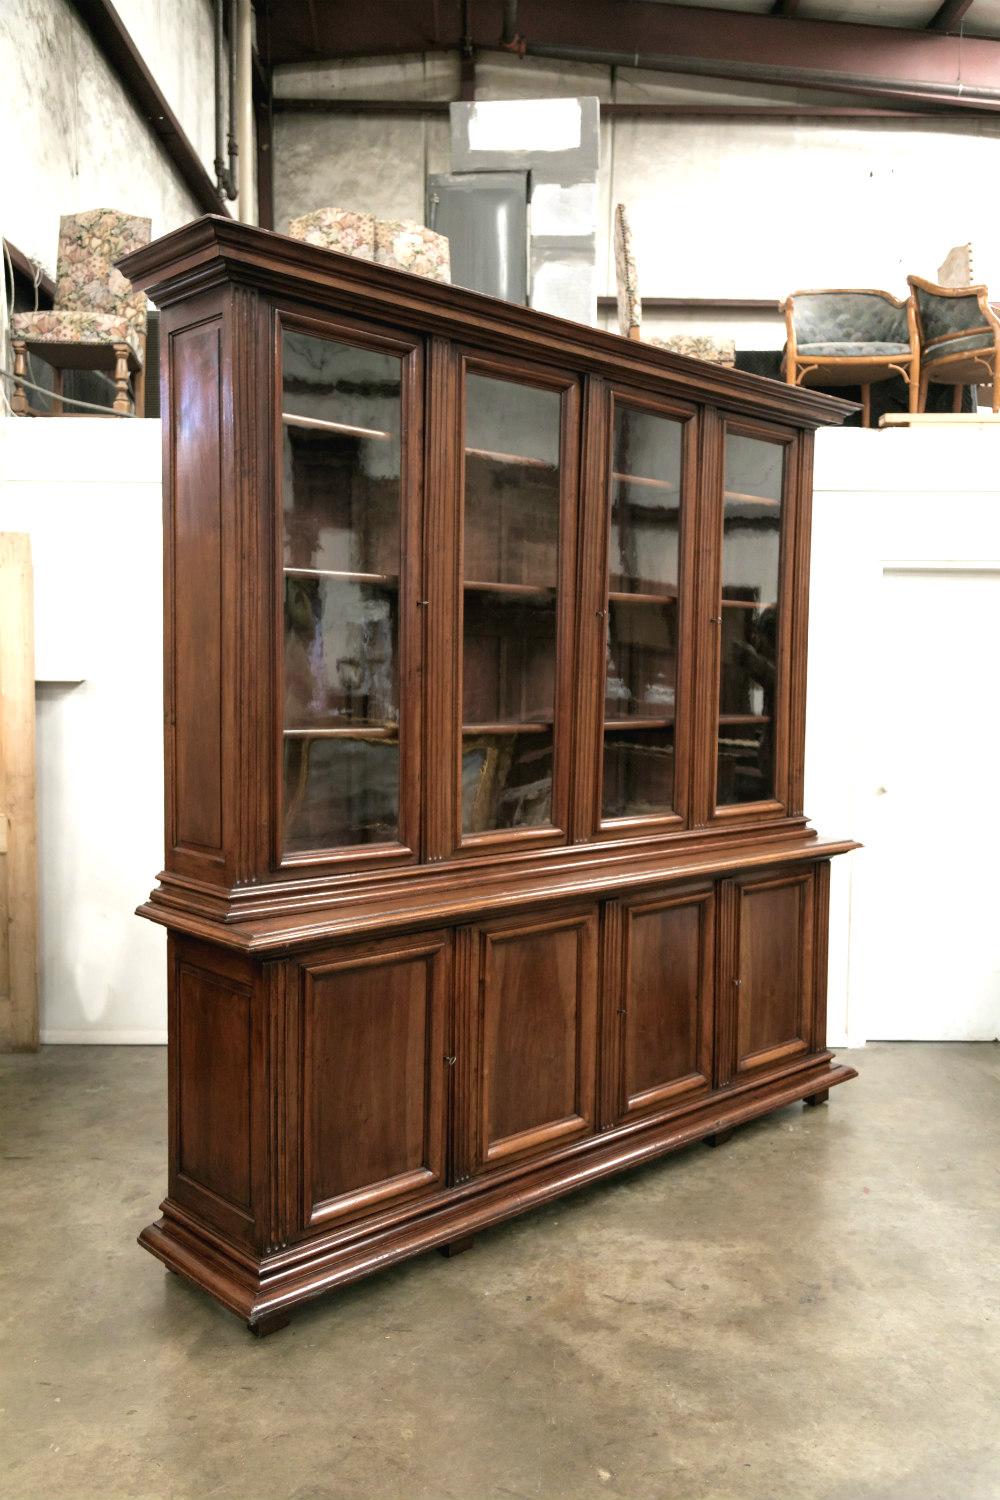 Transform your office or library into a special place where you can display your priceless book collection, family heirlooms, or sports and hunting trophies just as the French did hundreds of years ago with this grand 19th century French Napoleon